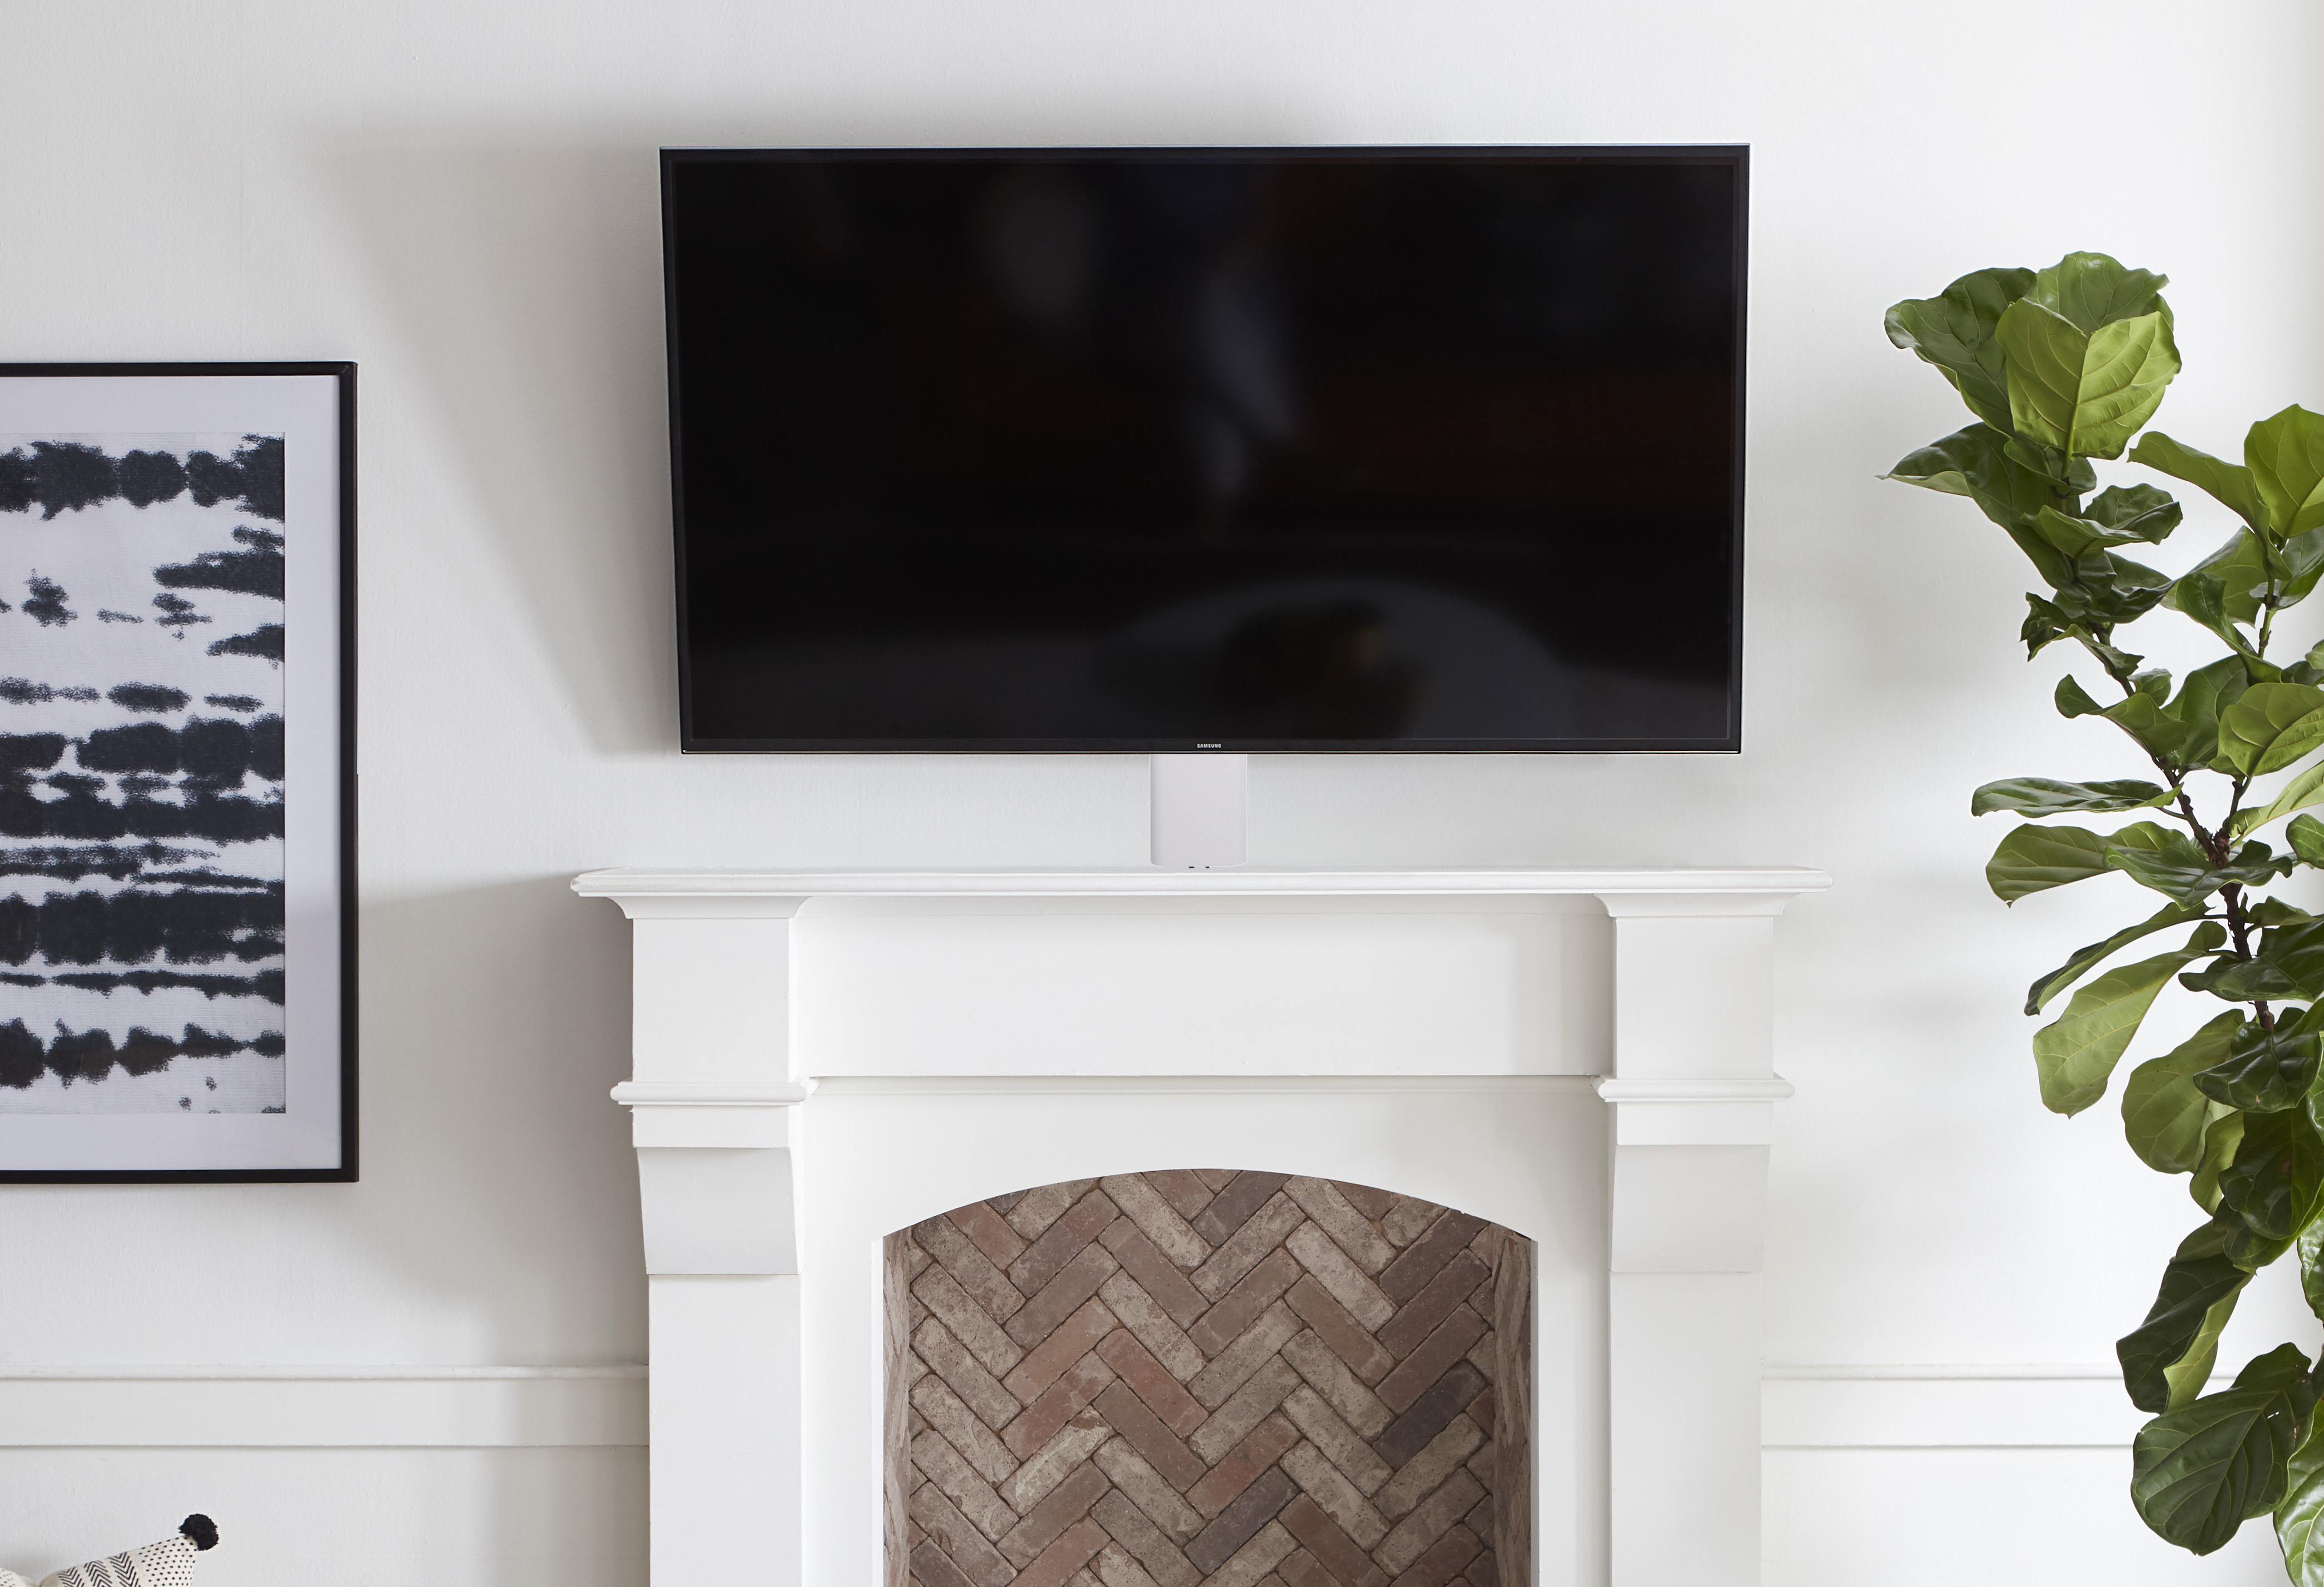 How To Hide Wall Mounted TV Cords Above a Fireplace Without an